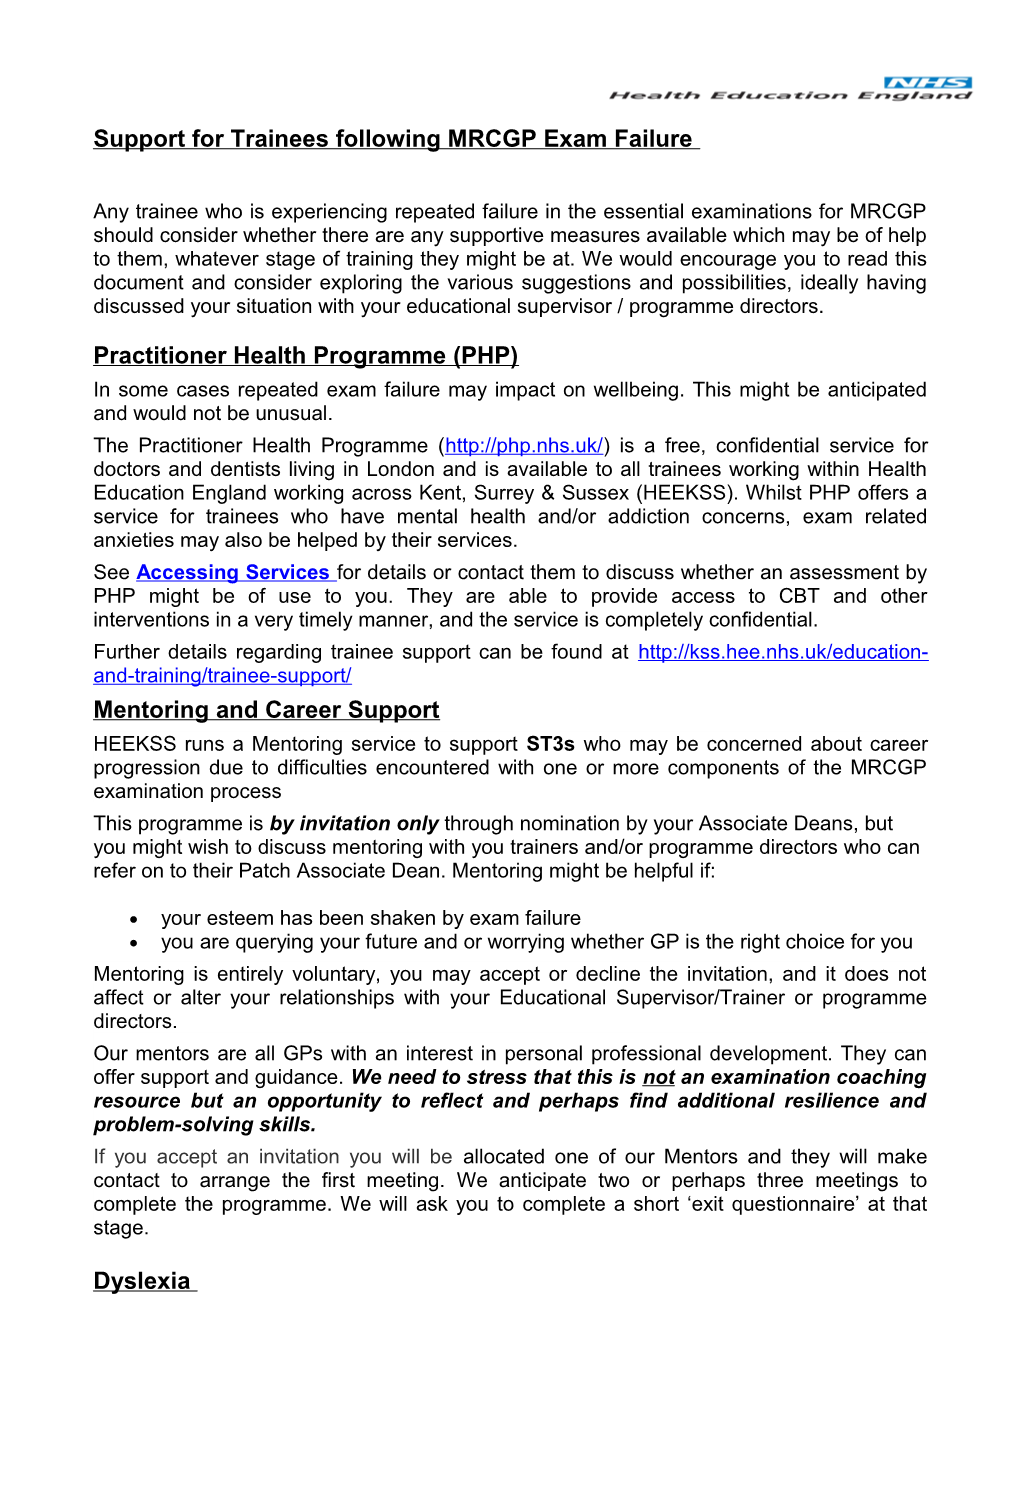 Support for Trainees Following MRCGP Exam Failure